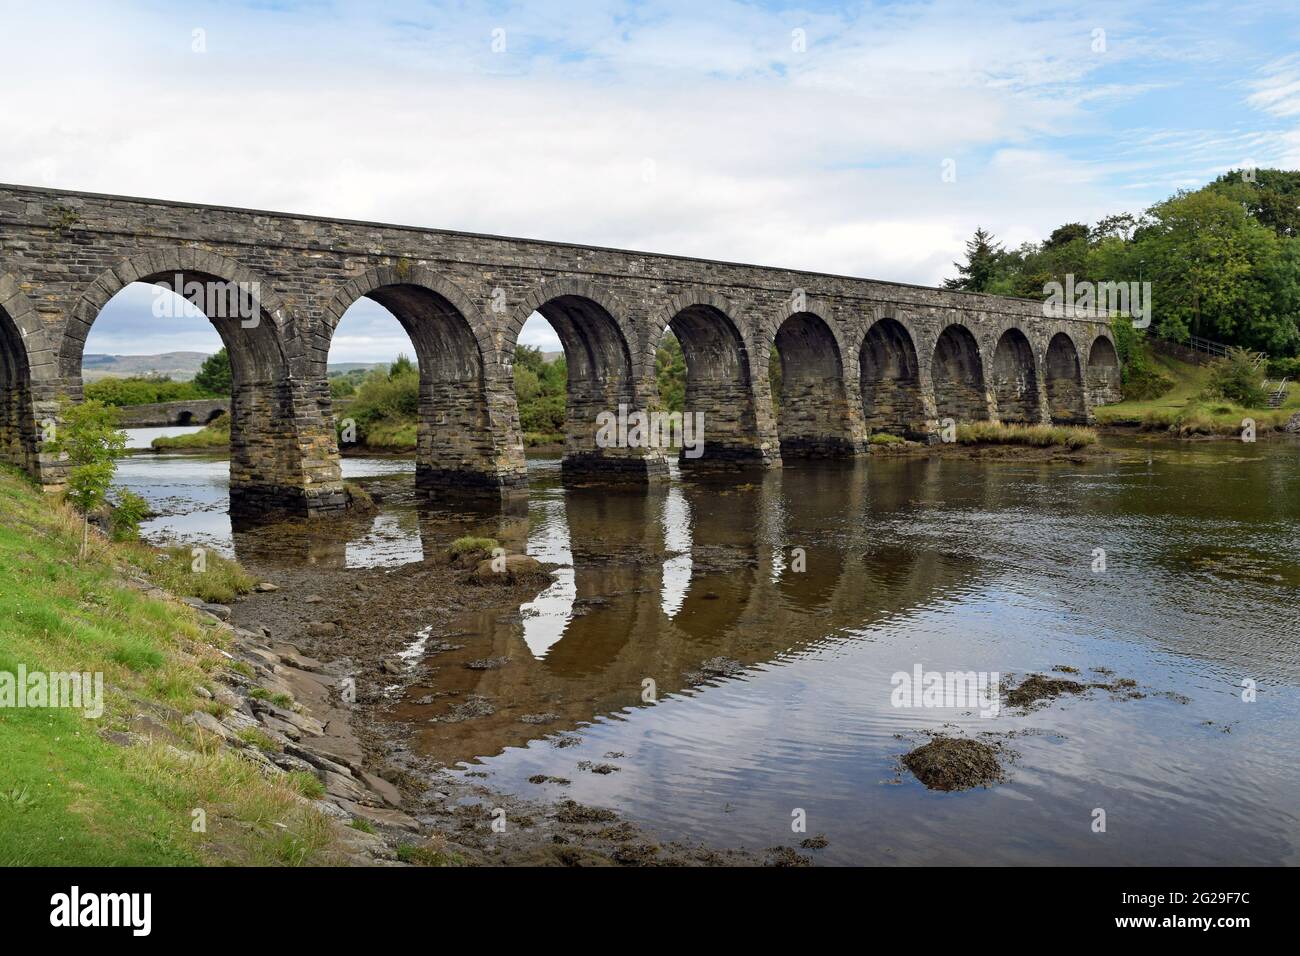 A 12 arch stone bridge / viaduct over a tidal inlet in Ballydehob, West Cork, Ireland. Stock Photo